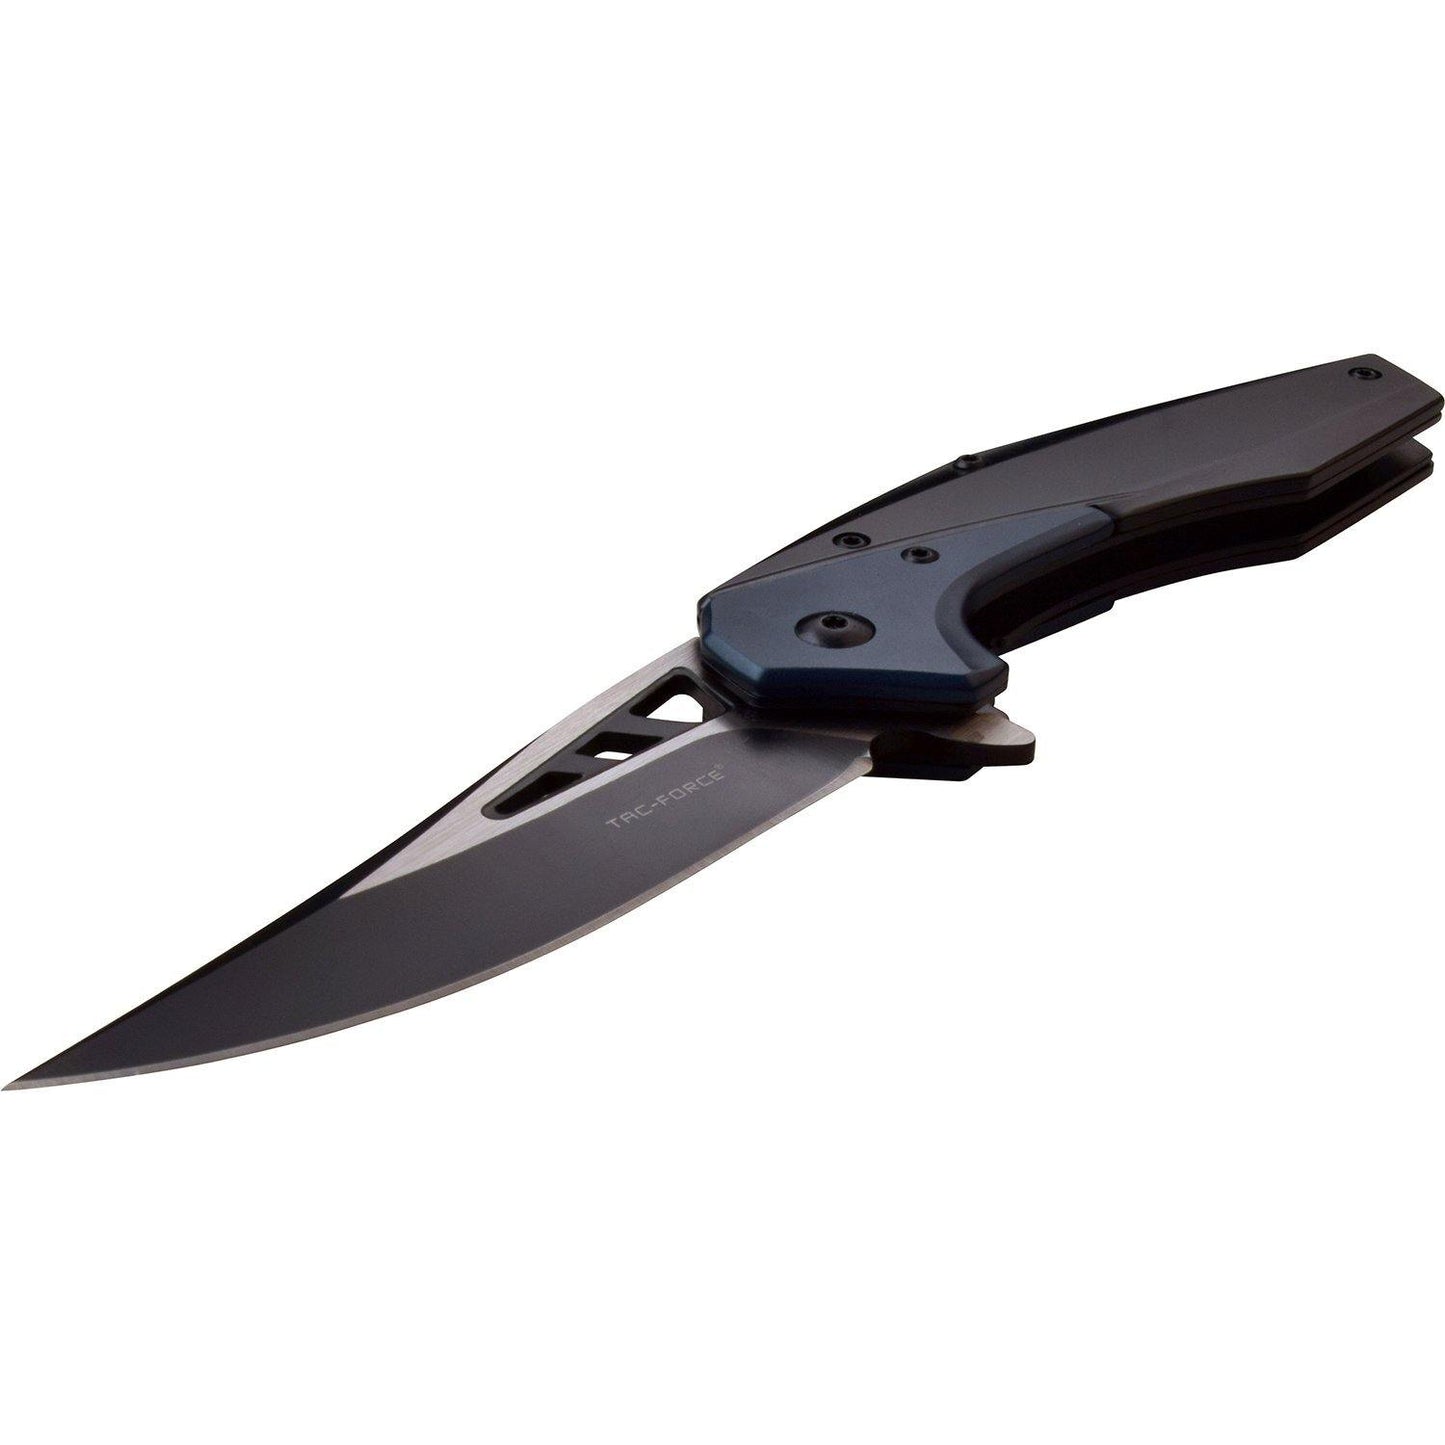 Tac-Force Persian Fine Edge Blade Folding Knife - 7.75 Inches Overall #tf-977Bl - Xhunter New Zealand